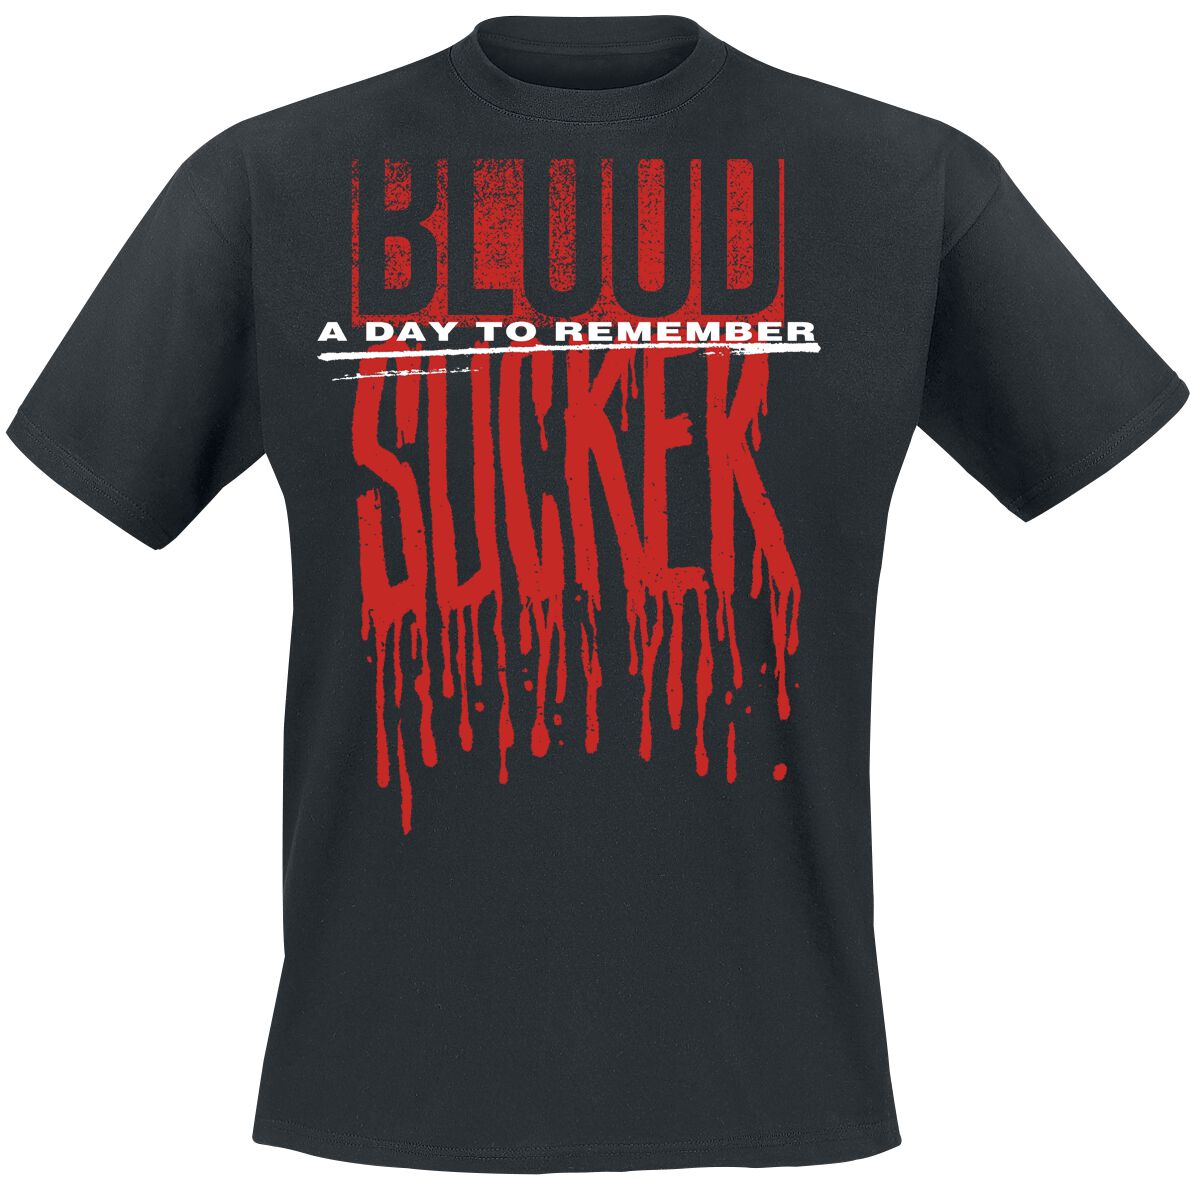 A Day To Remember Blood Sucker T-Shirt black